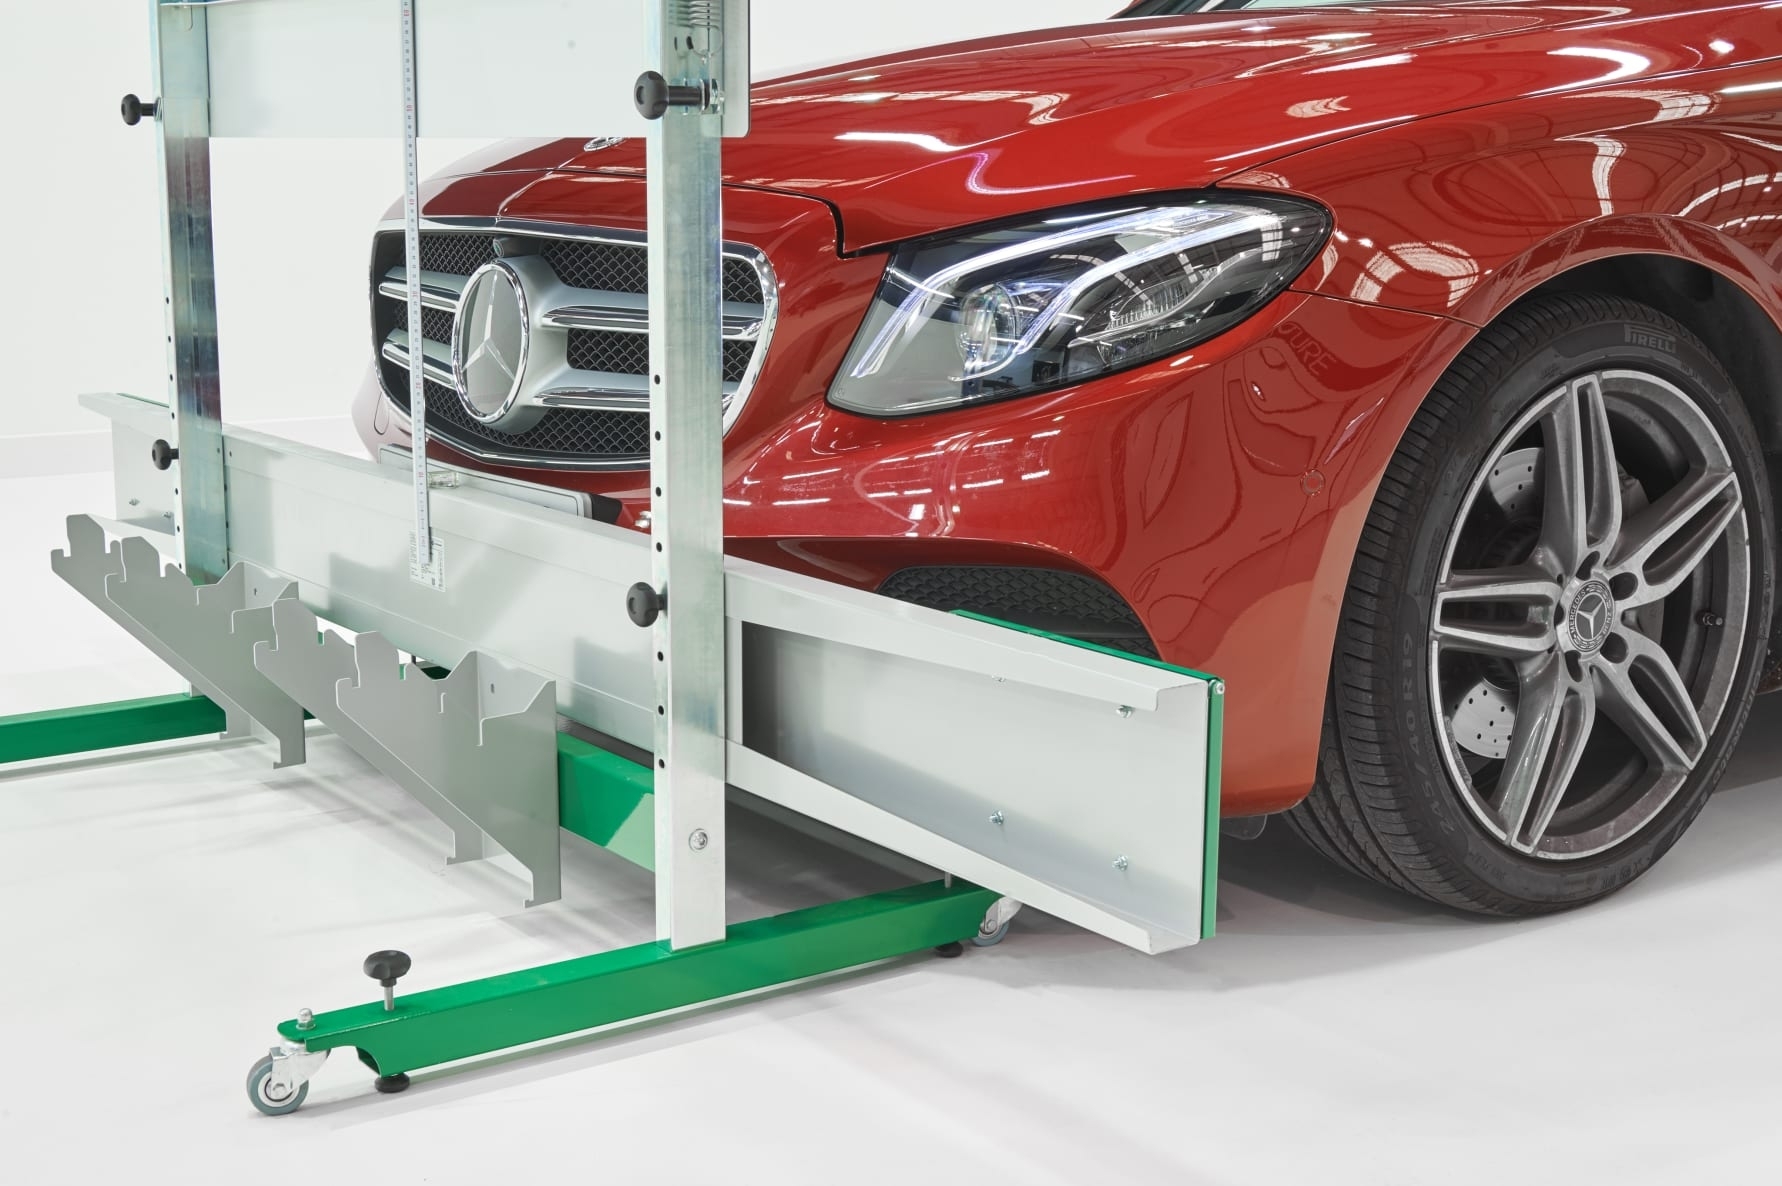 ADAS IIR applies when making any body geometry changes to wheel alignment, suspension geometry or ride height